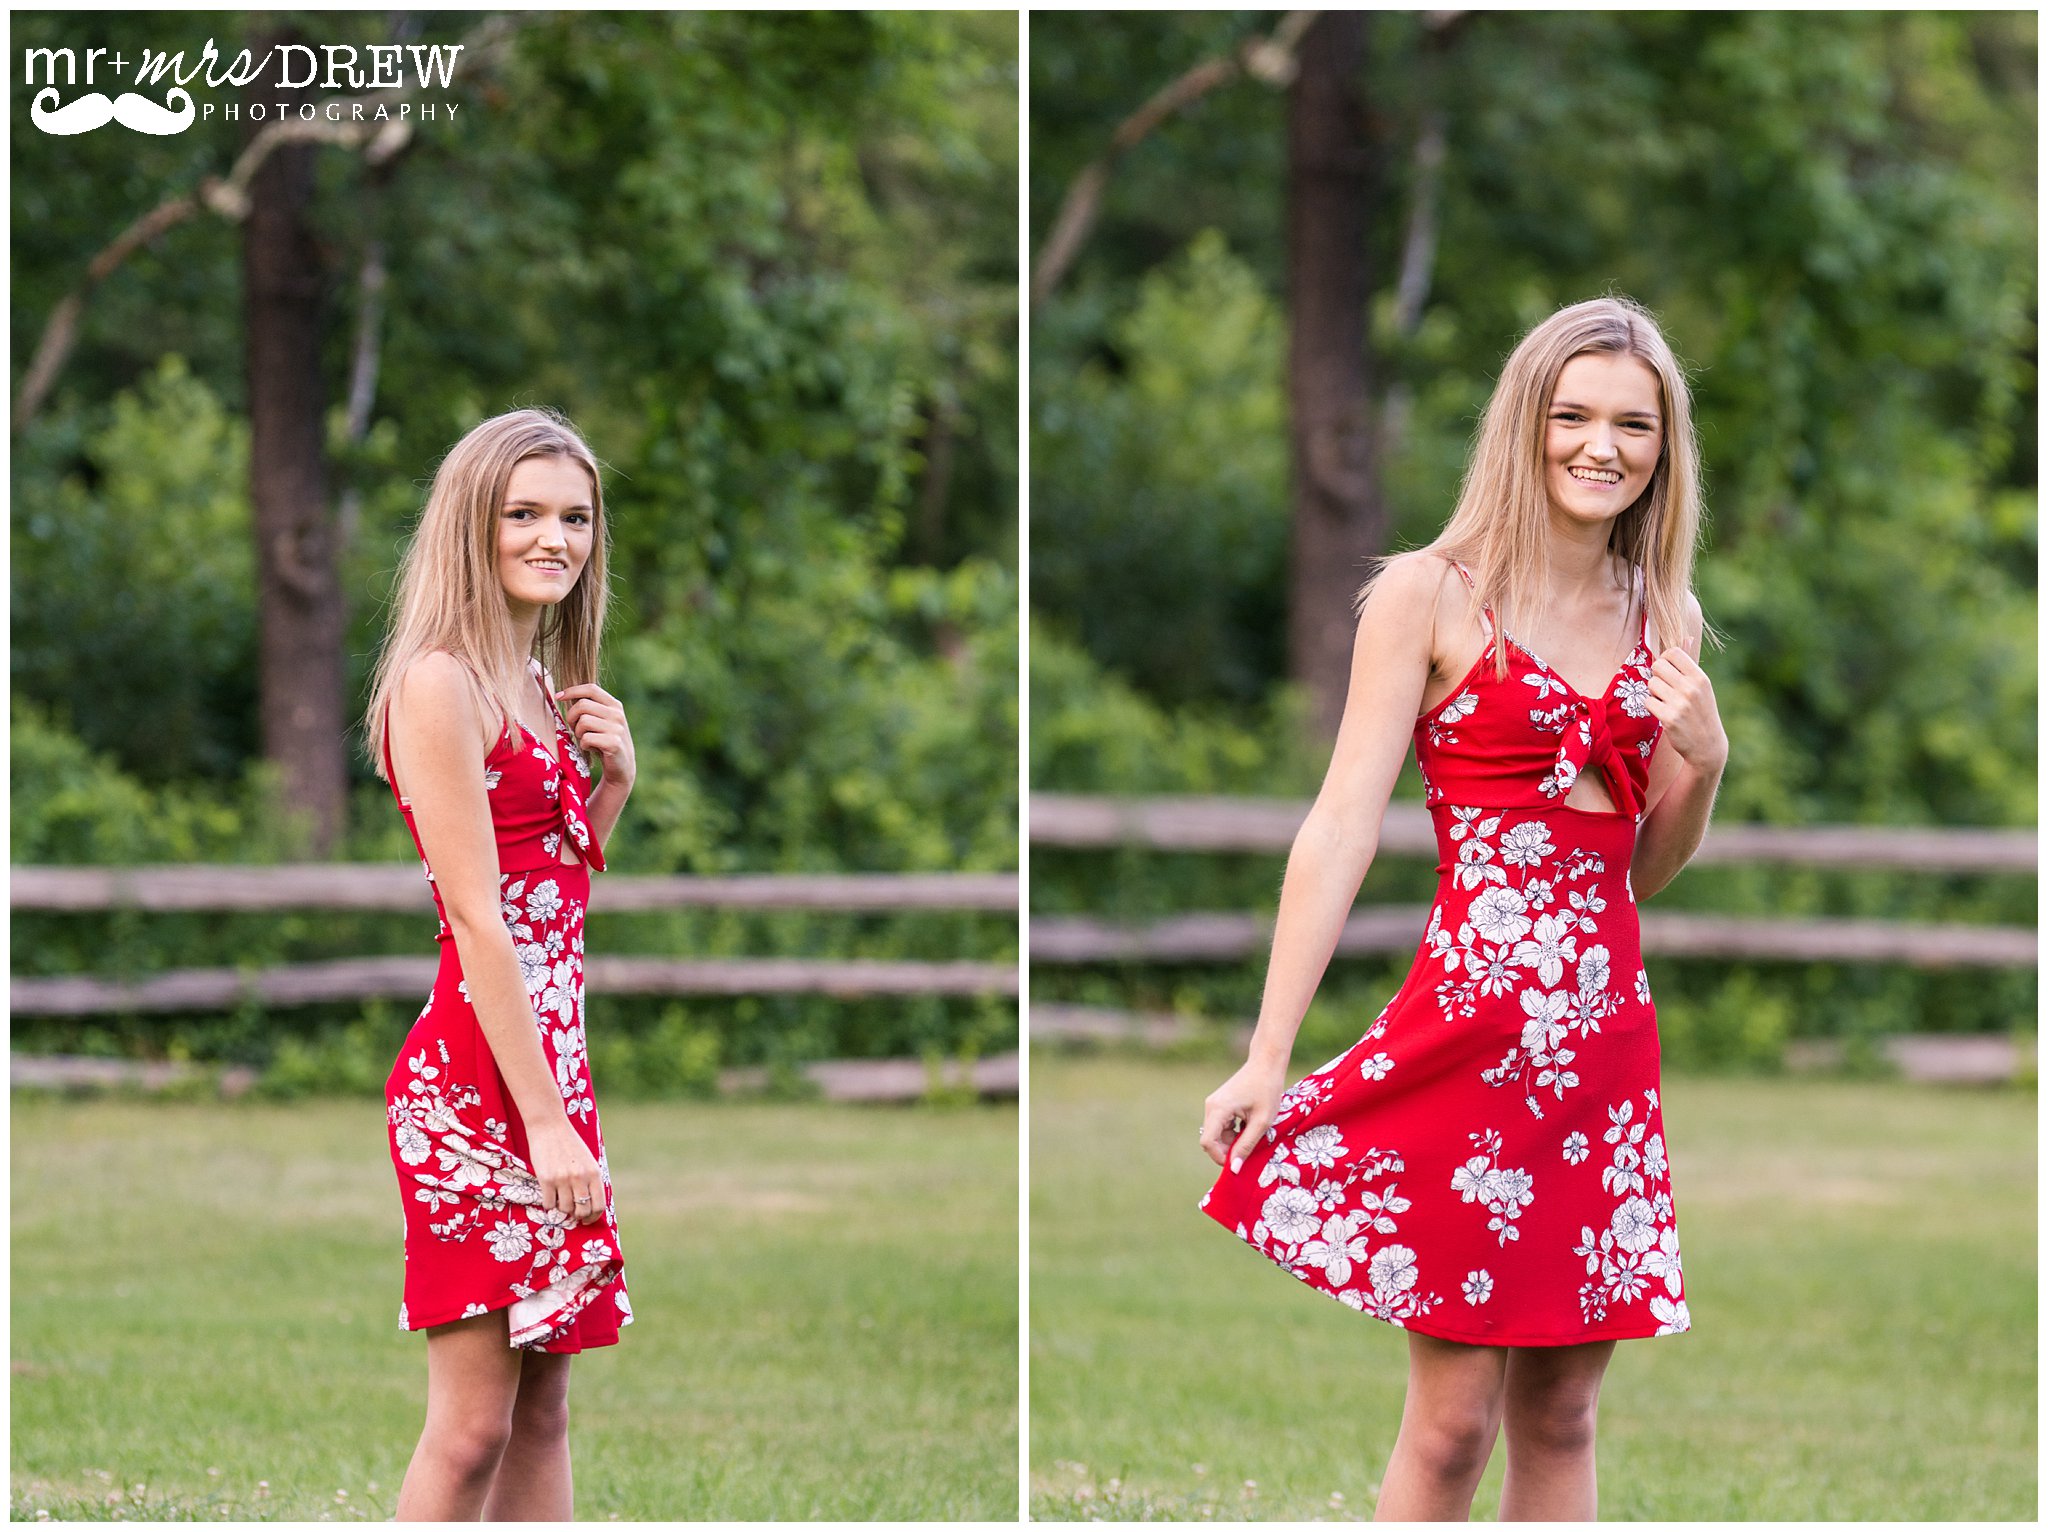 Senior Portrait of girl in Red floral dress holding on her dress and twirling.